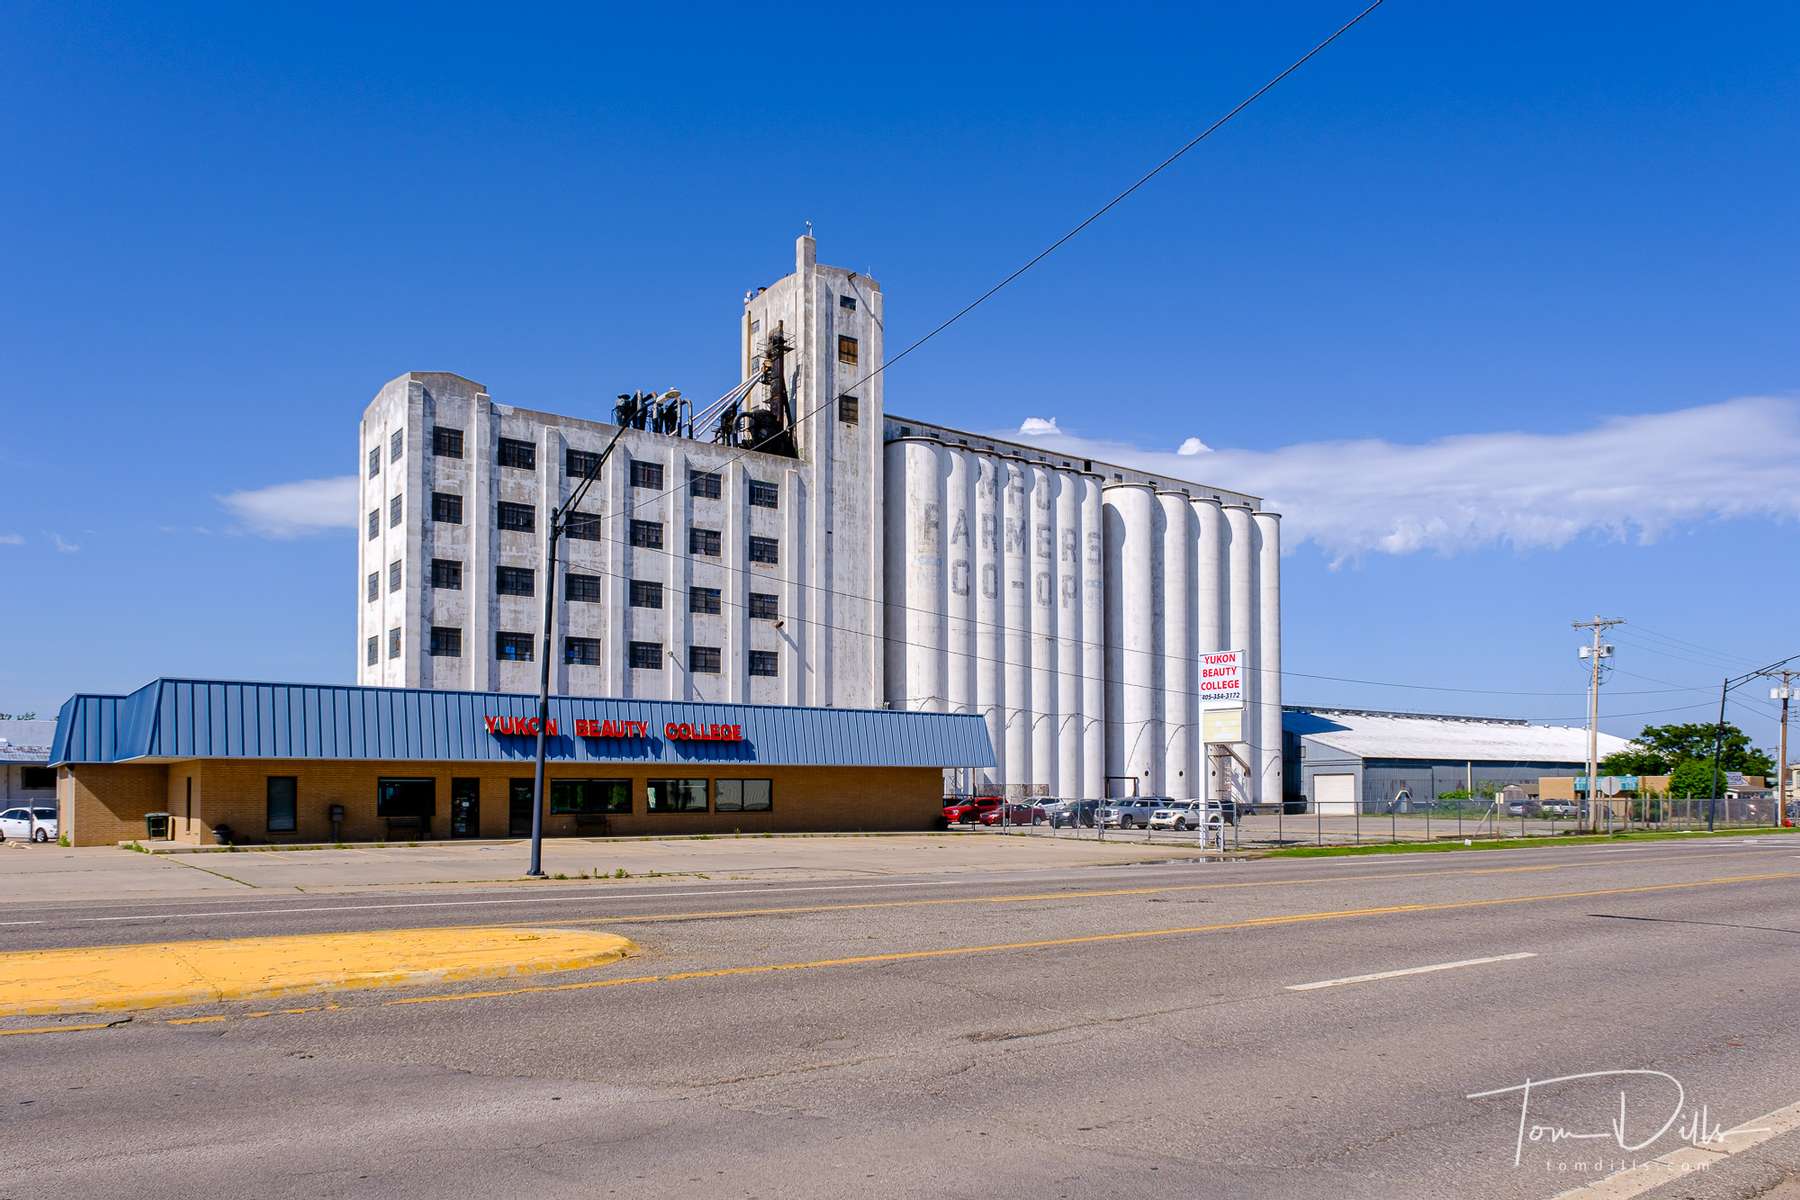 {quote}Yukon's Best Flour{quote} mill located on Historic Route 66 in Yukon, Oklahoma